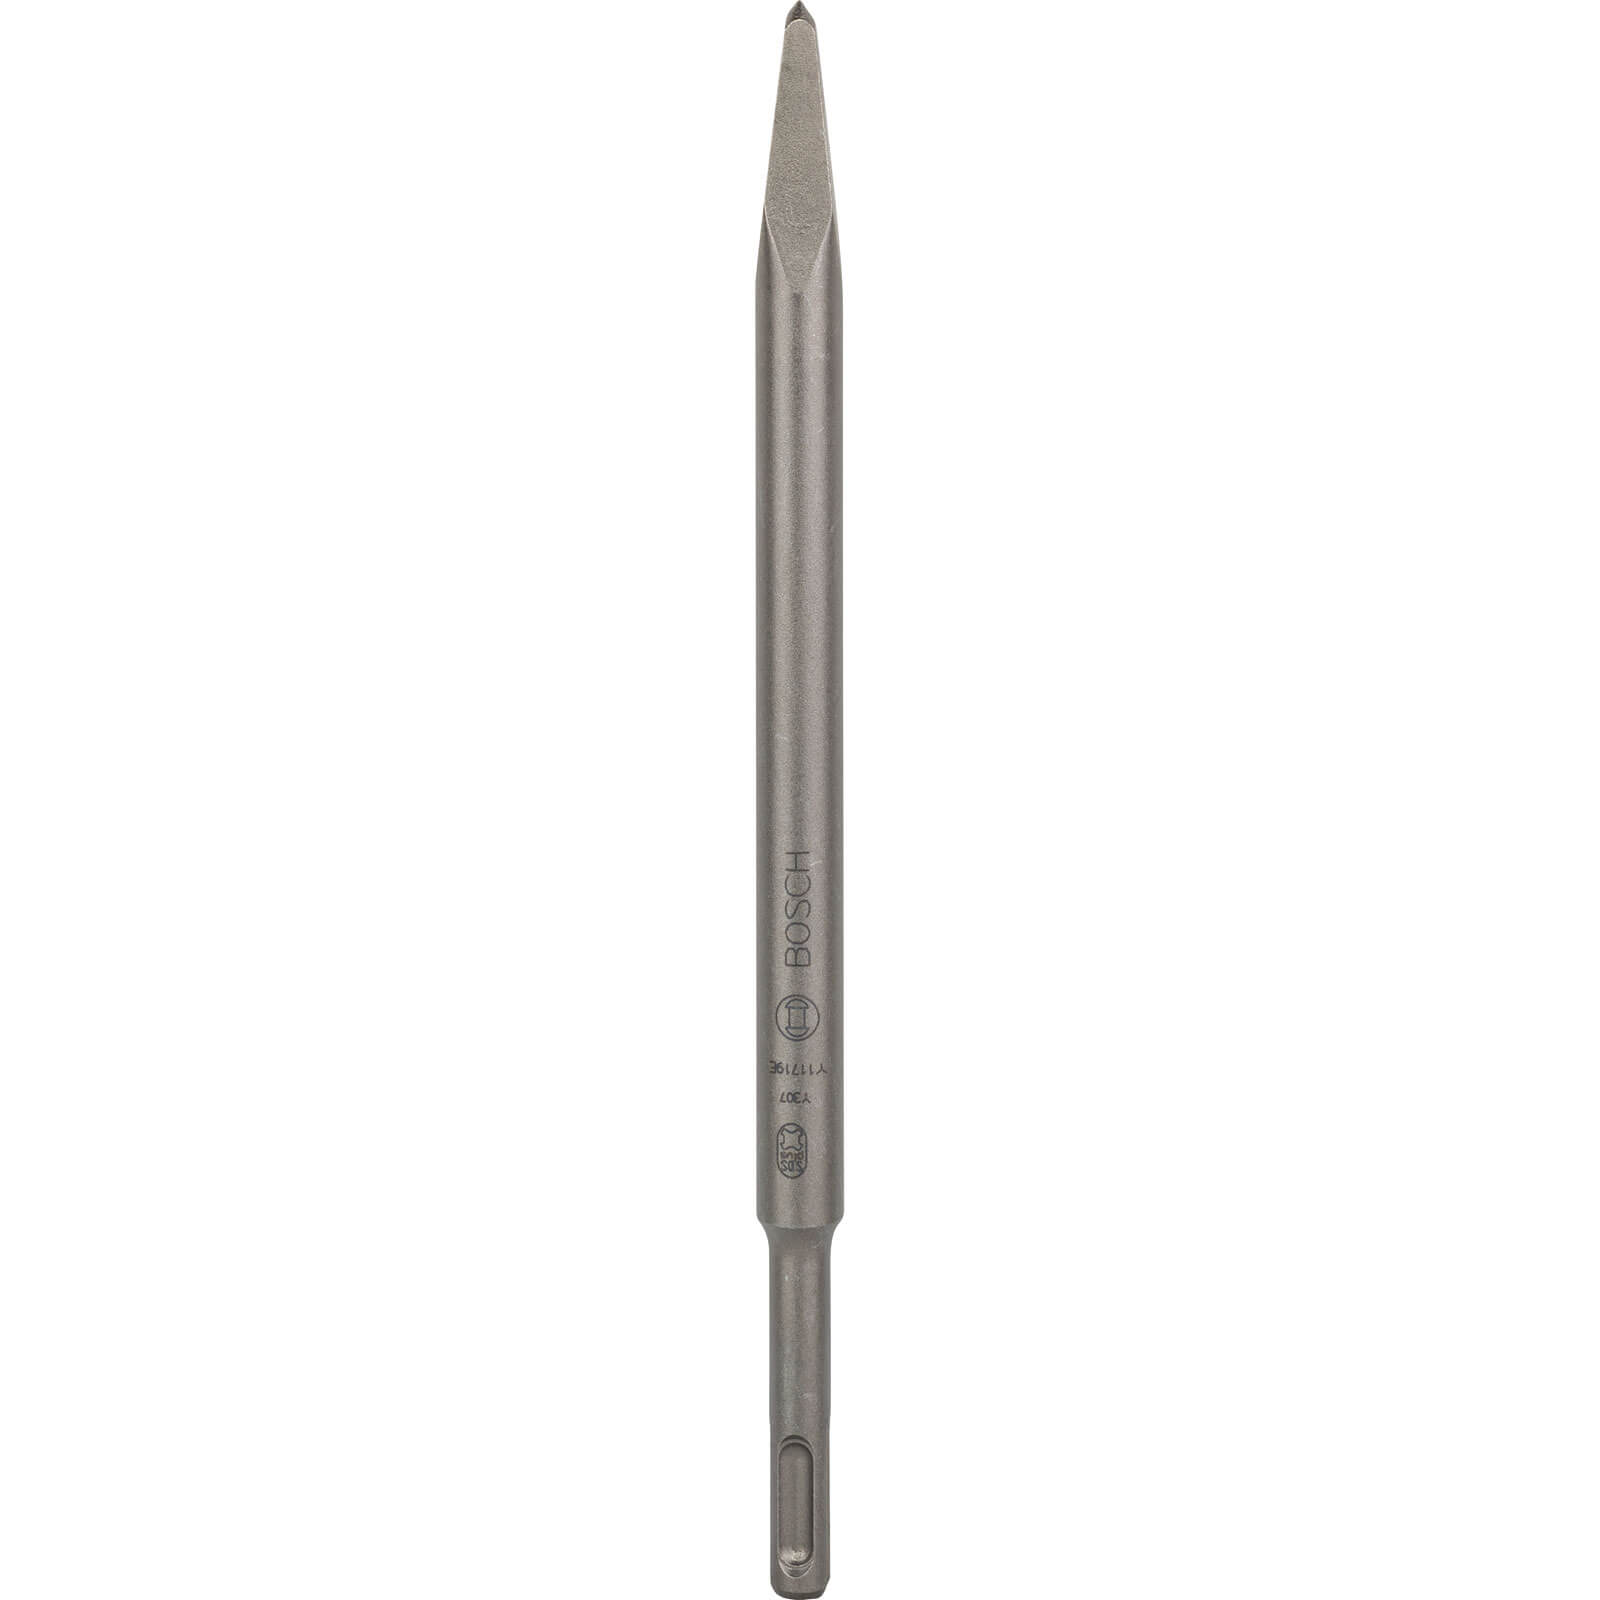 Photos - Drill Bit Bosch SDS Plus Pointed Chisel 250mm 2608690145 